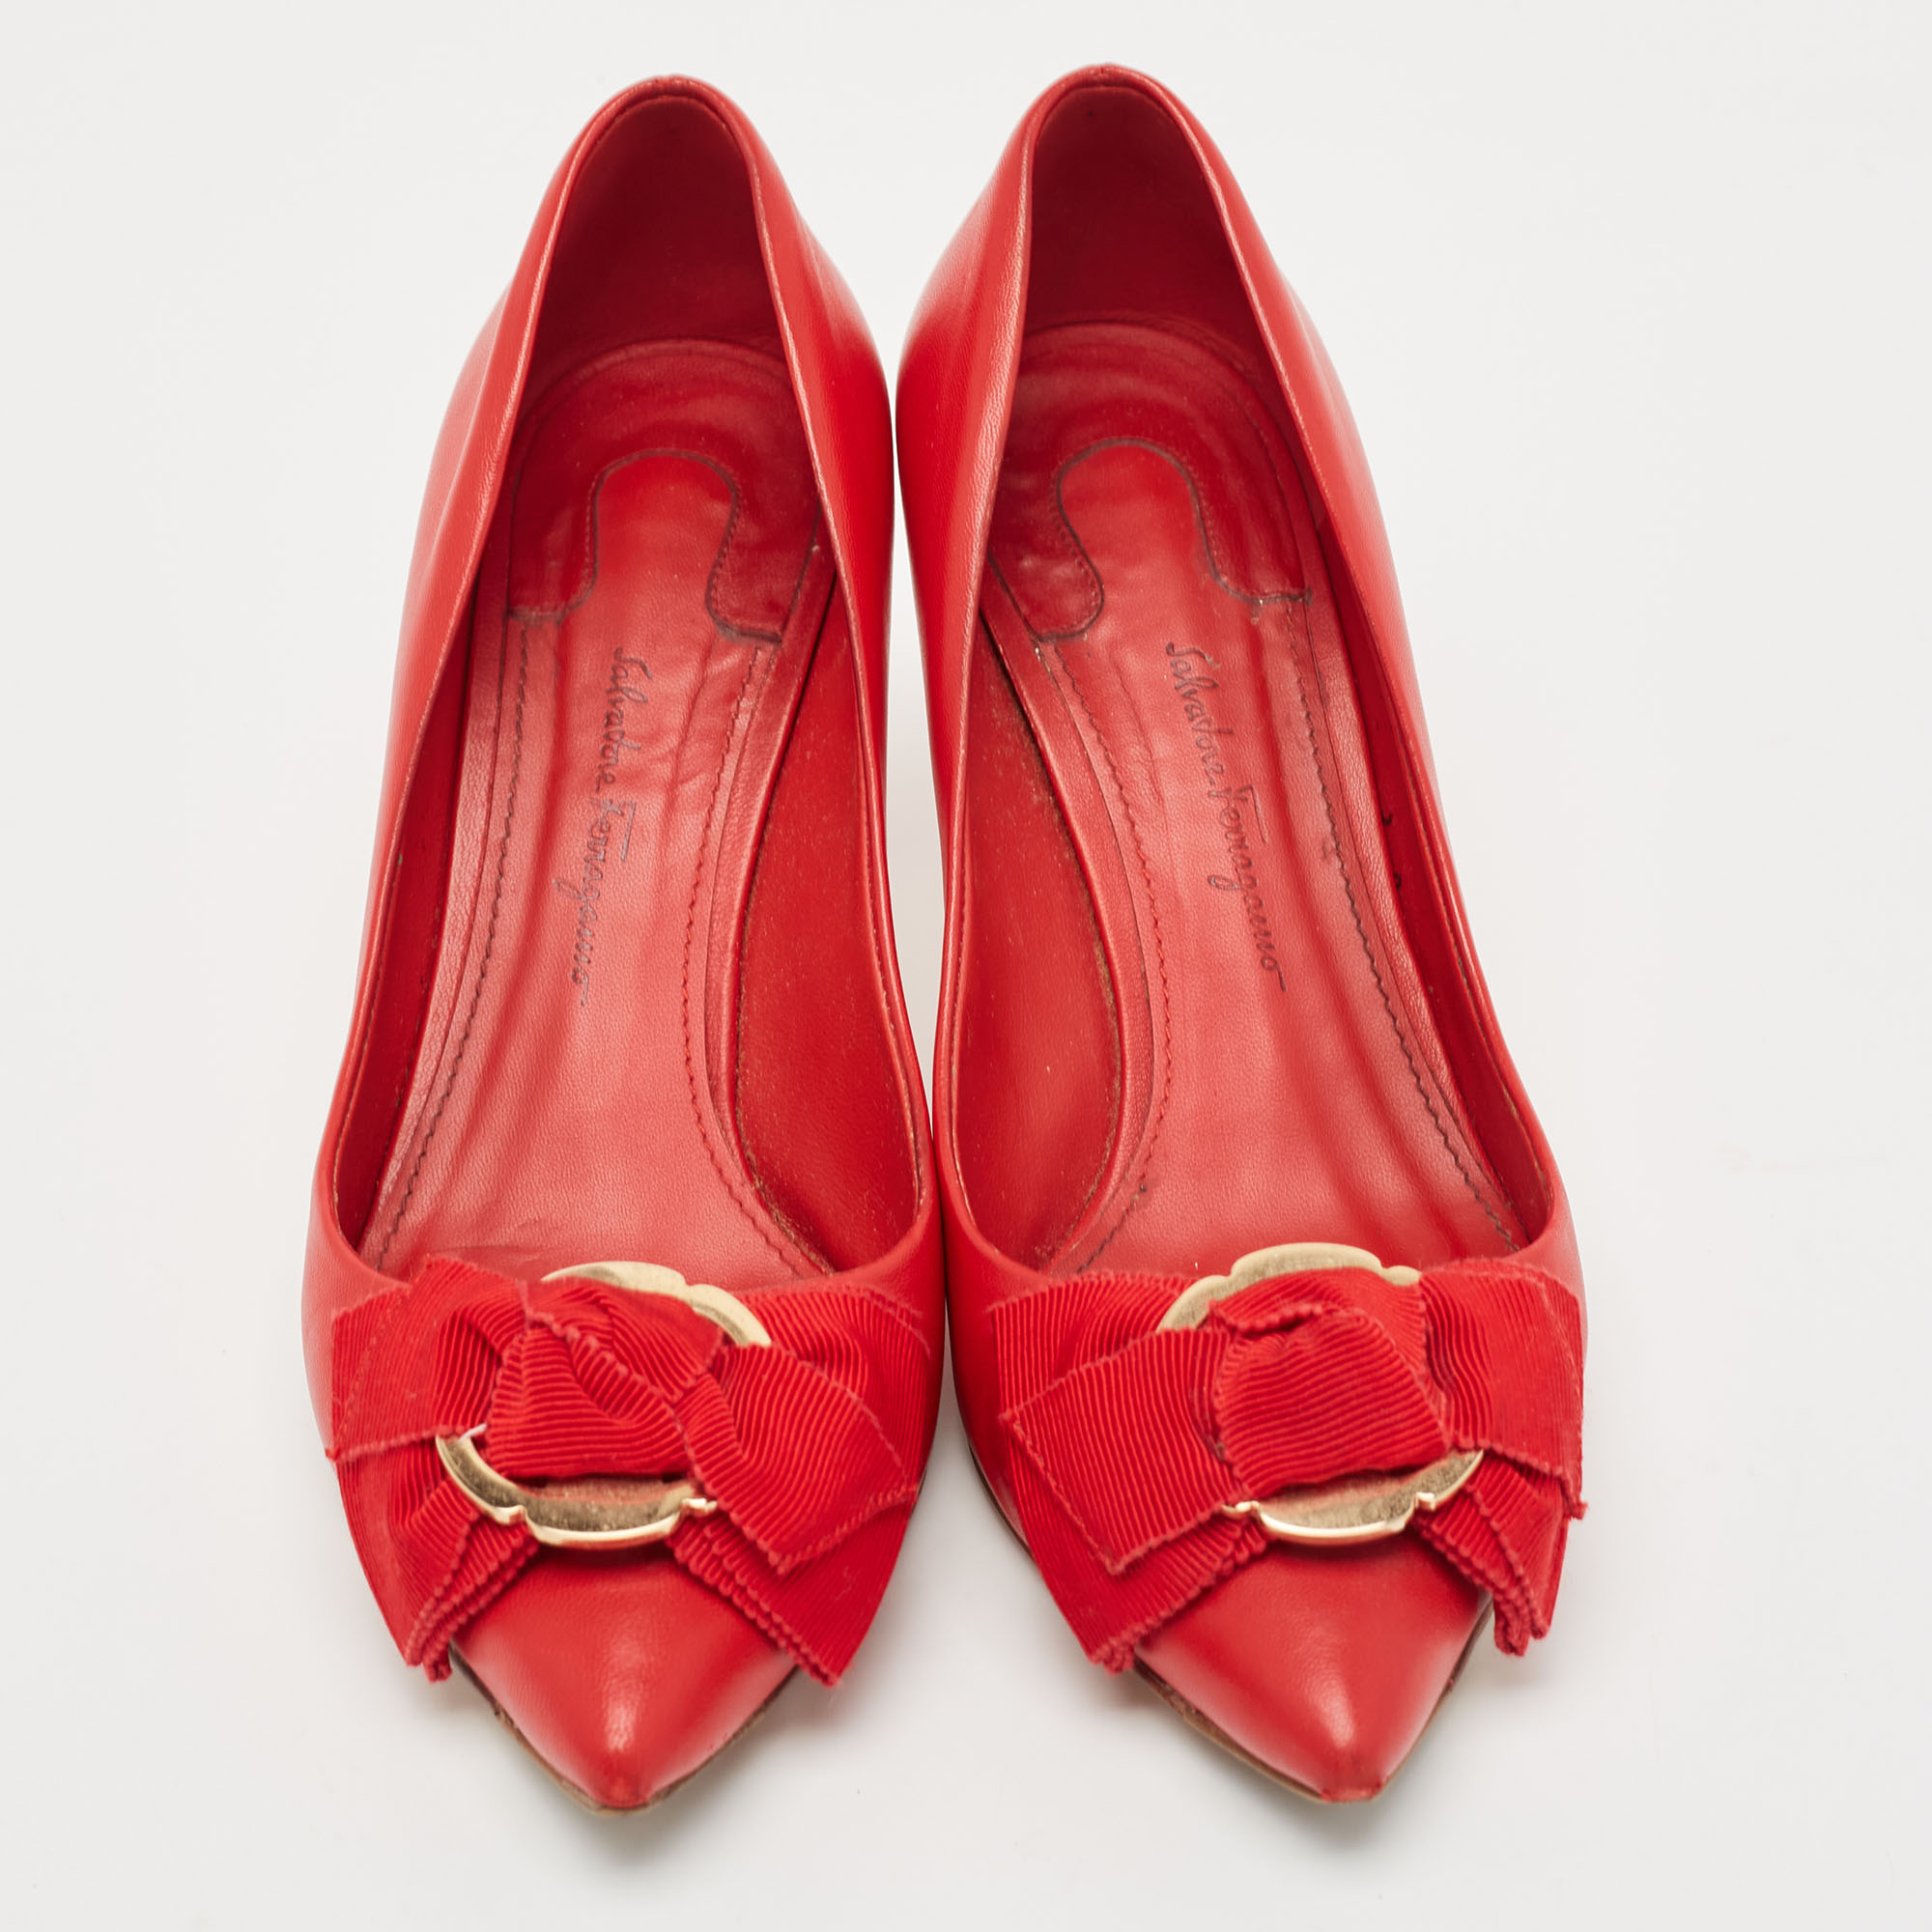 Salvatore Ferragamo Red Leather Pointed Toe Pumps Size 35.5